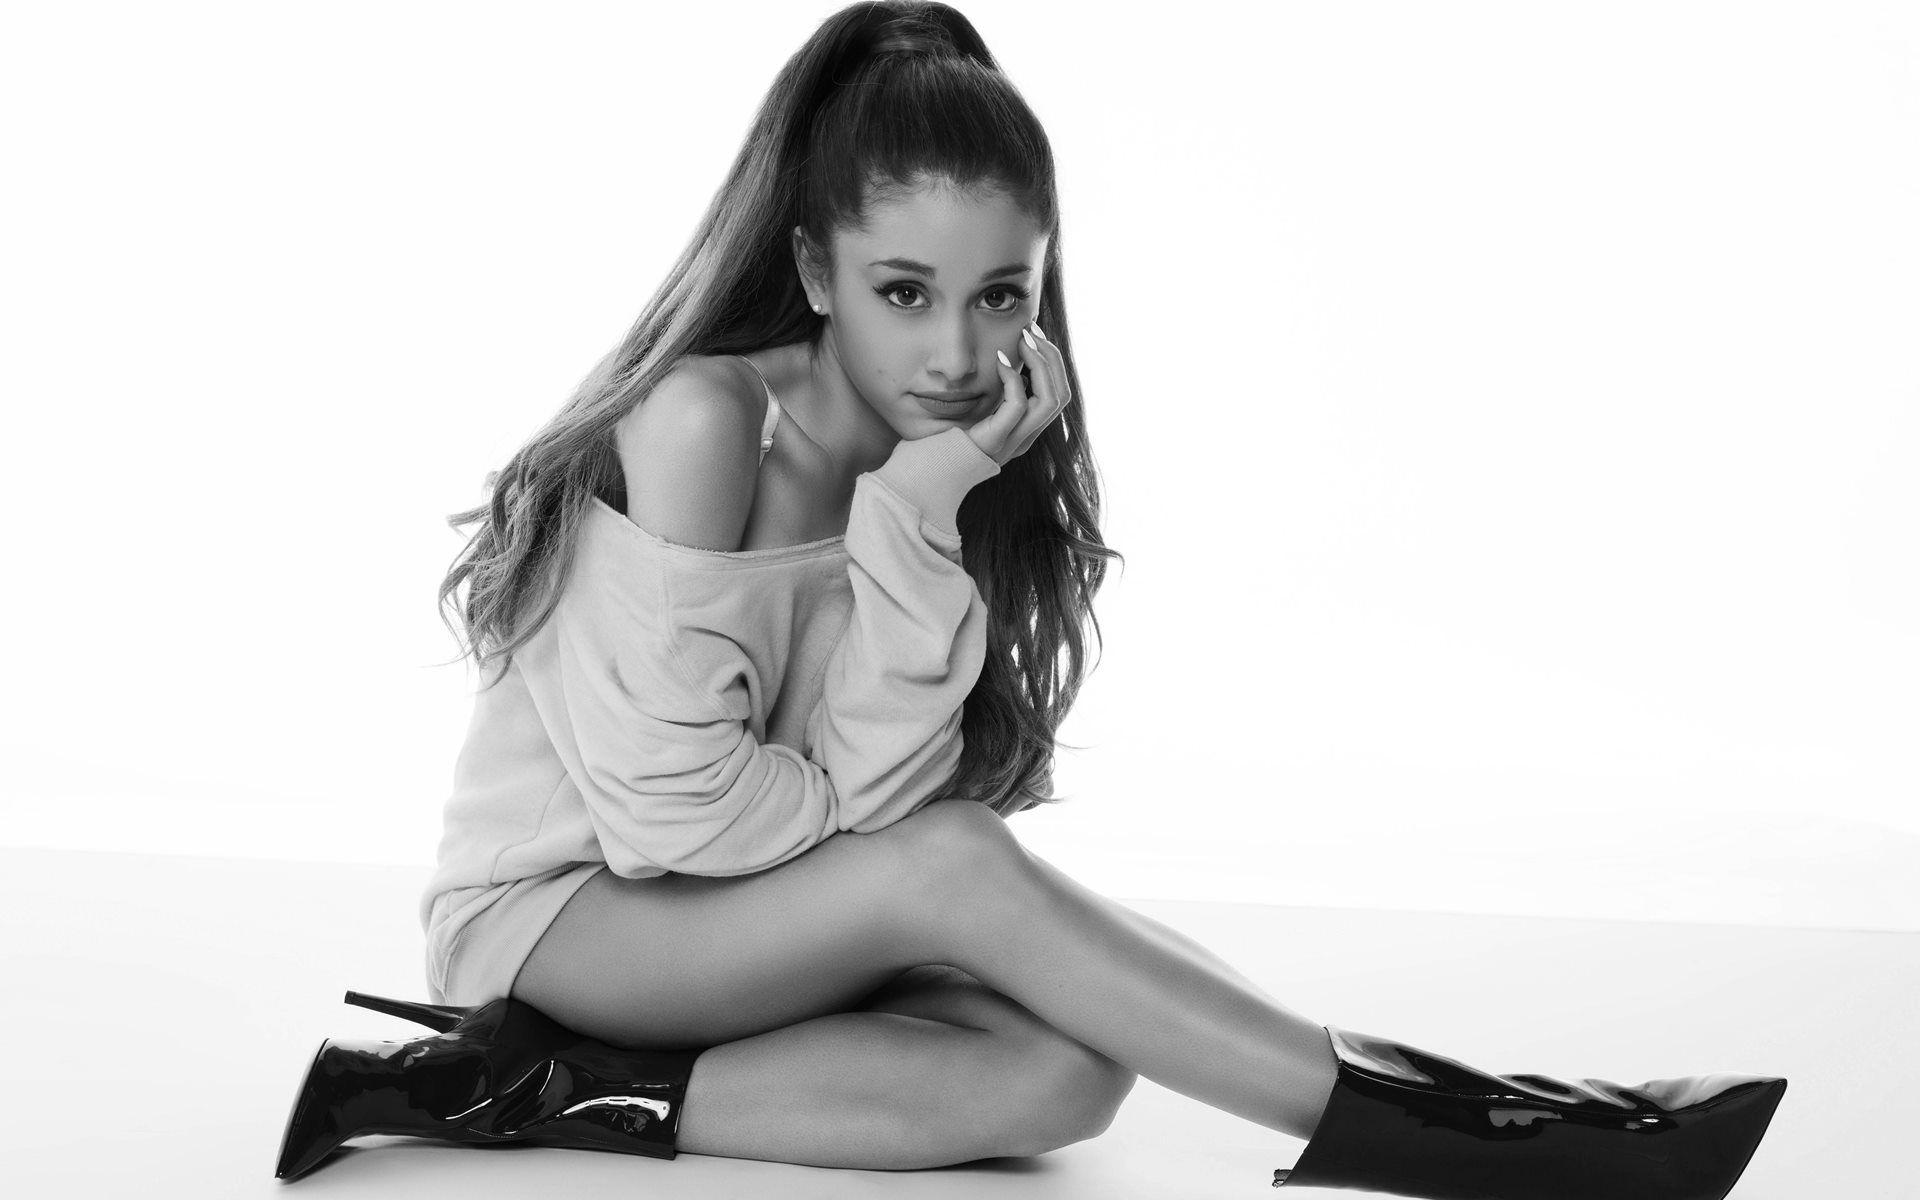 Ariana Grande is an American singer, songwriter, and actress. She was born on June 26, 1993, in Ariana Grande was born in Florida, United States. - Ariana Grande